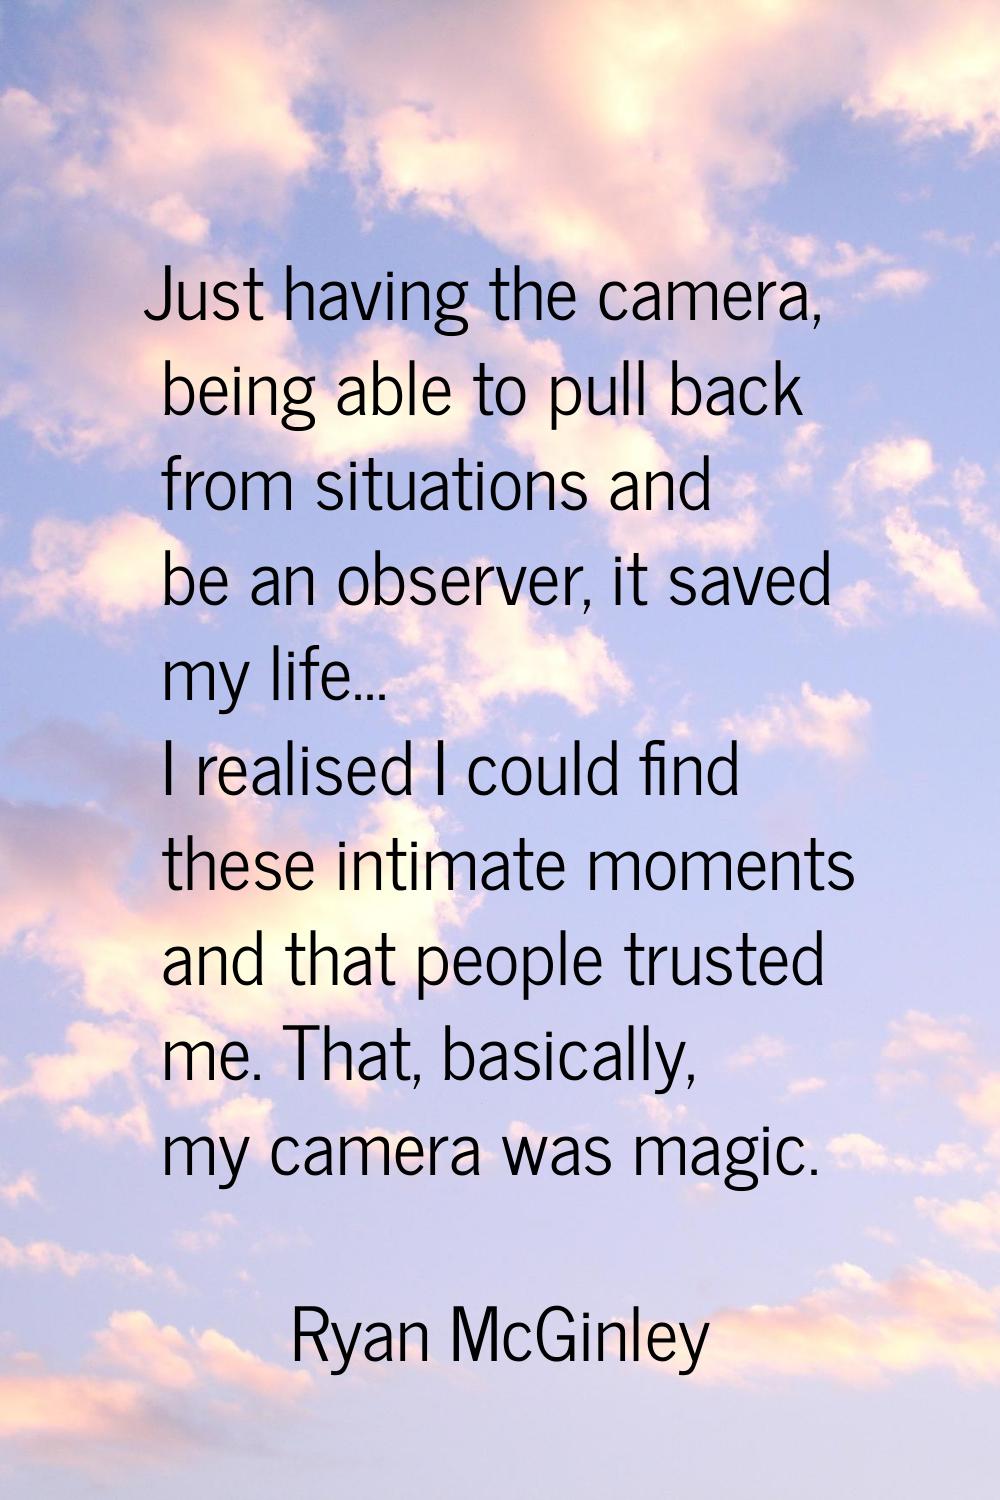 Just having the camera, being able to pull back from situations and be an observer, it saved my lif